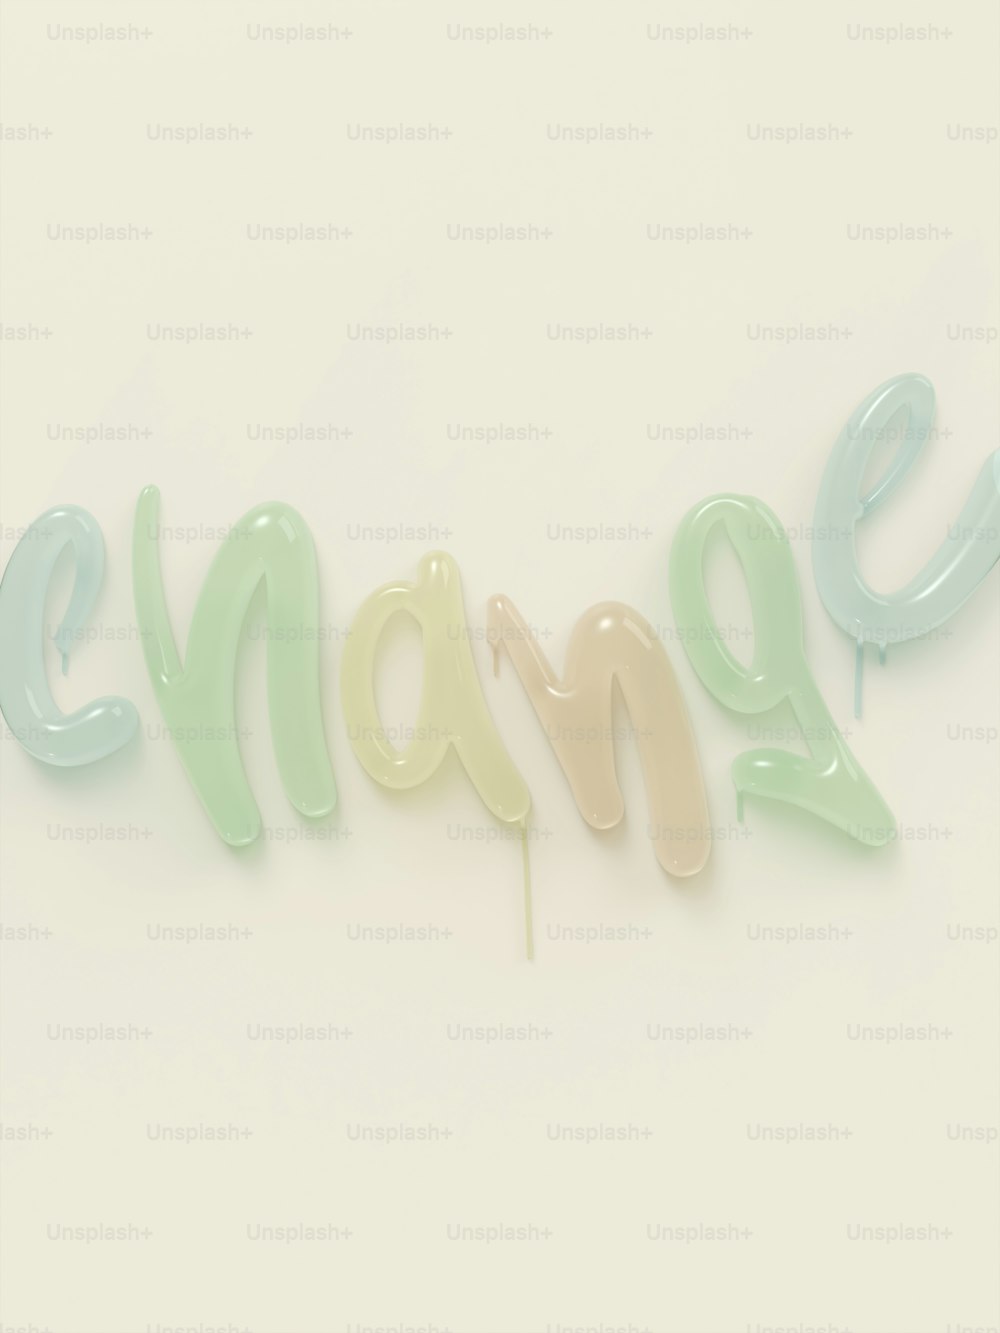 a word made out of balloons that spell out the word imagine